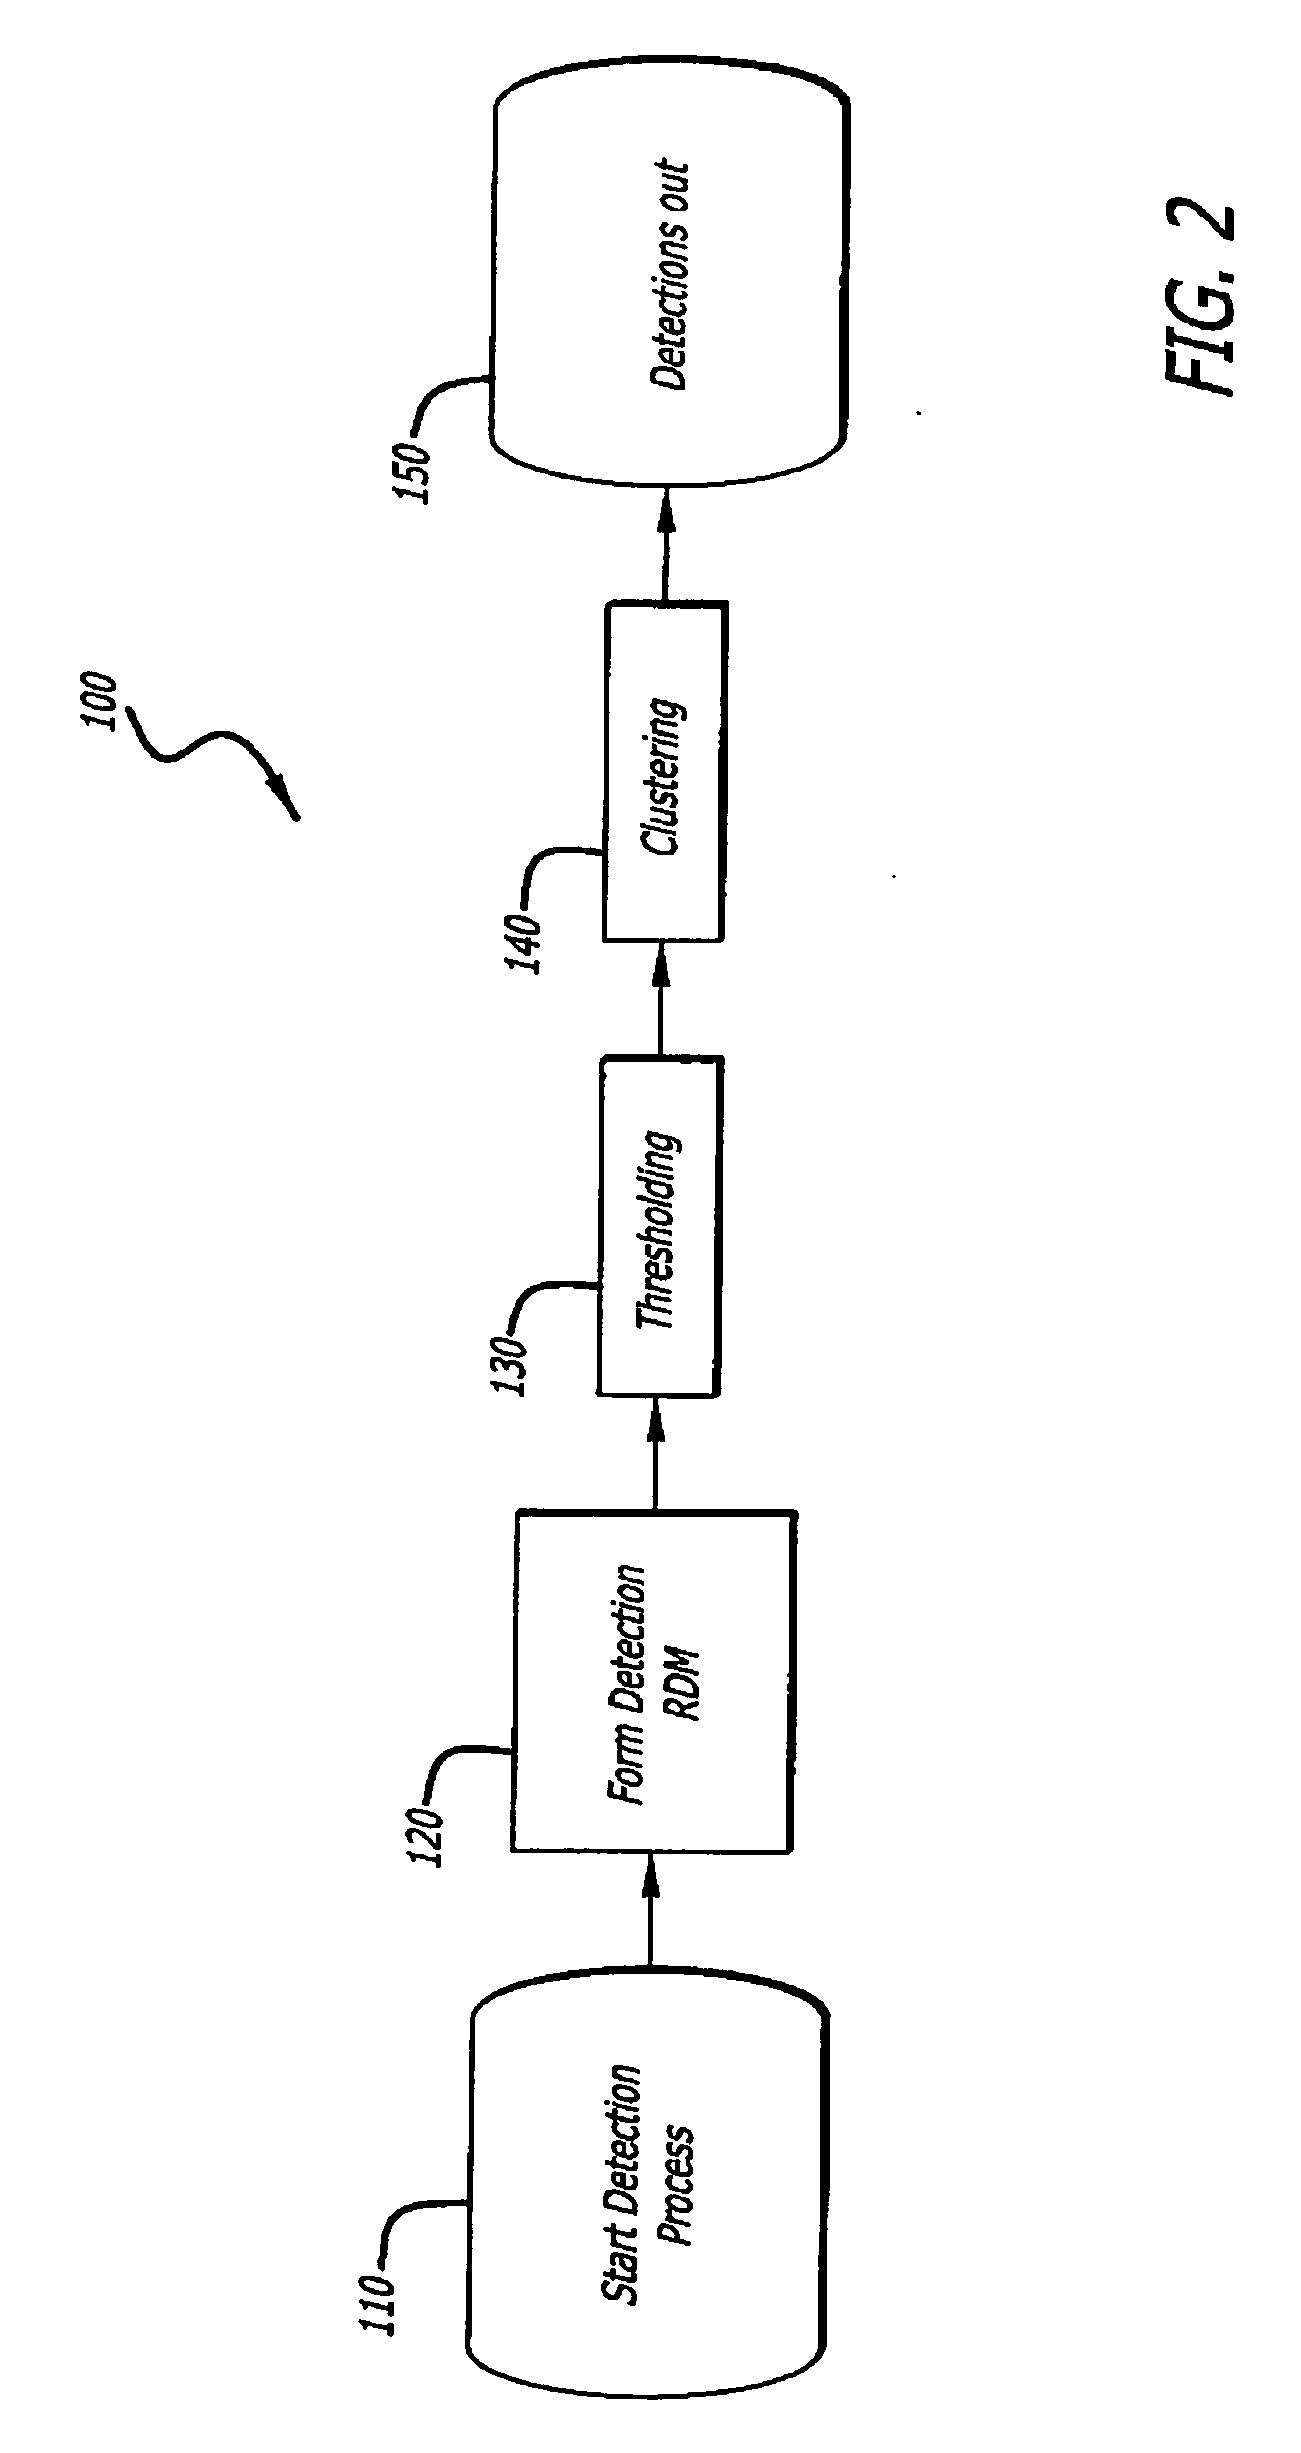 Radar imaging system and method using directional gradient magnitude second moment spatial variance detection